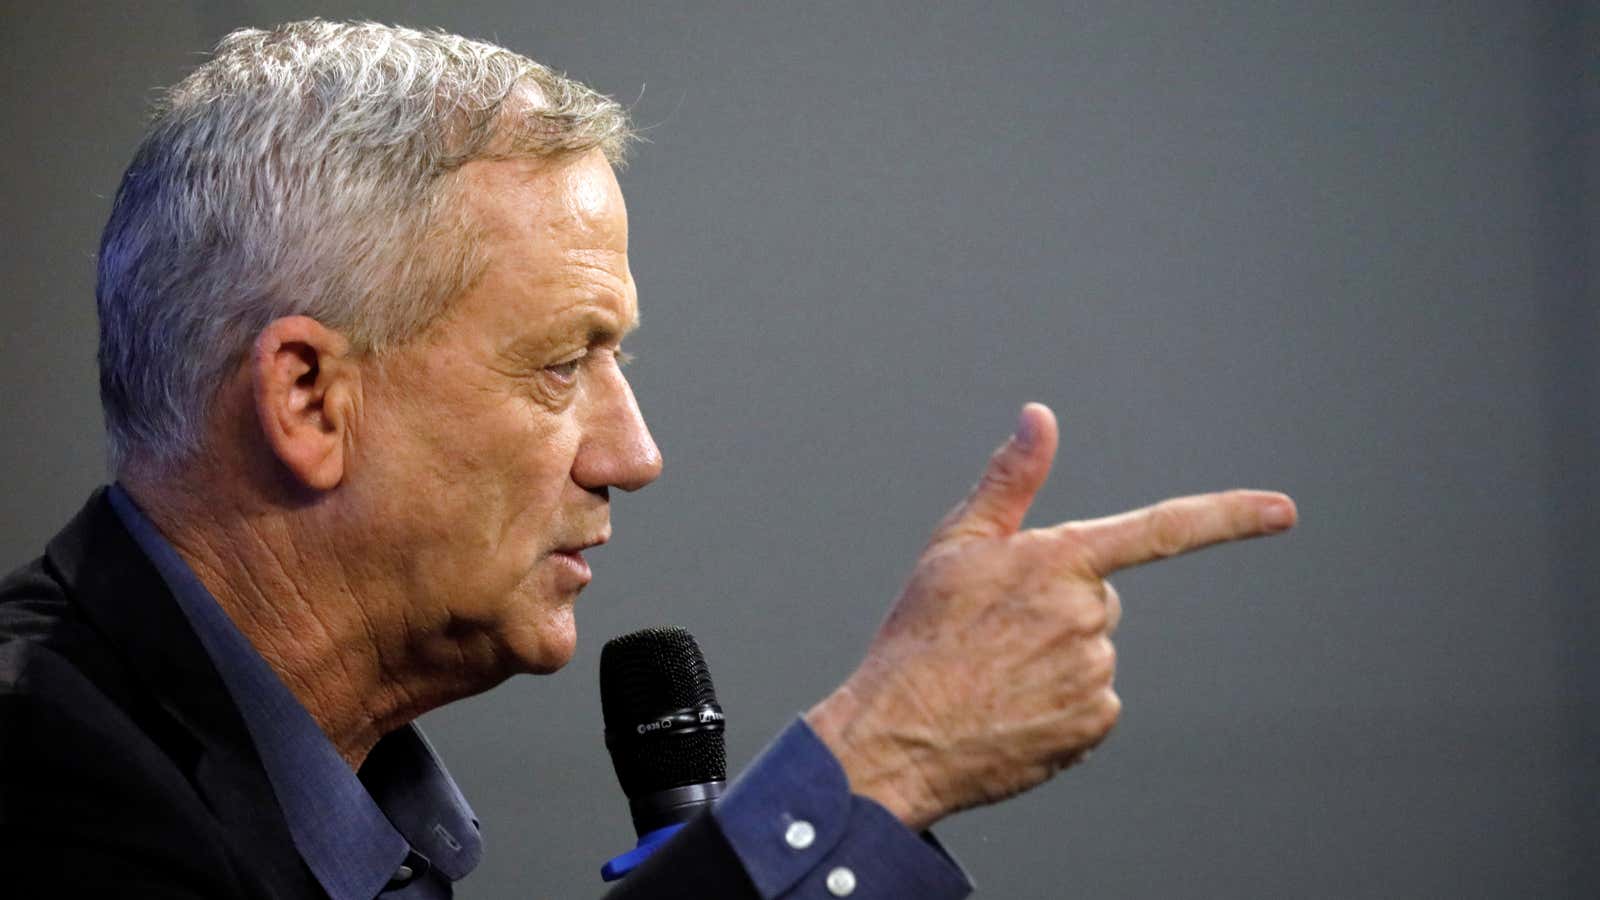 Benny Gantz, leader of Blue and White party, wants to return to the negotiating table.